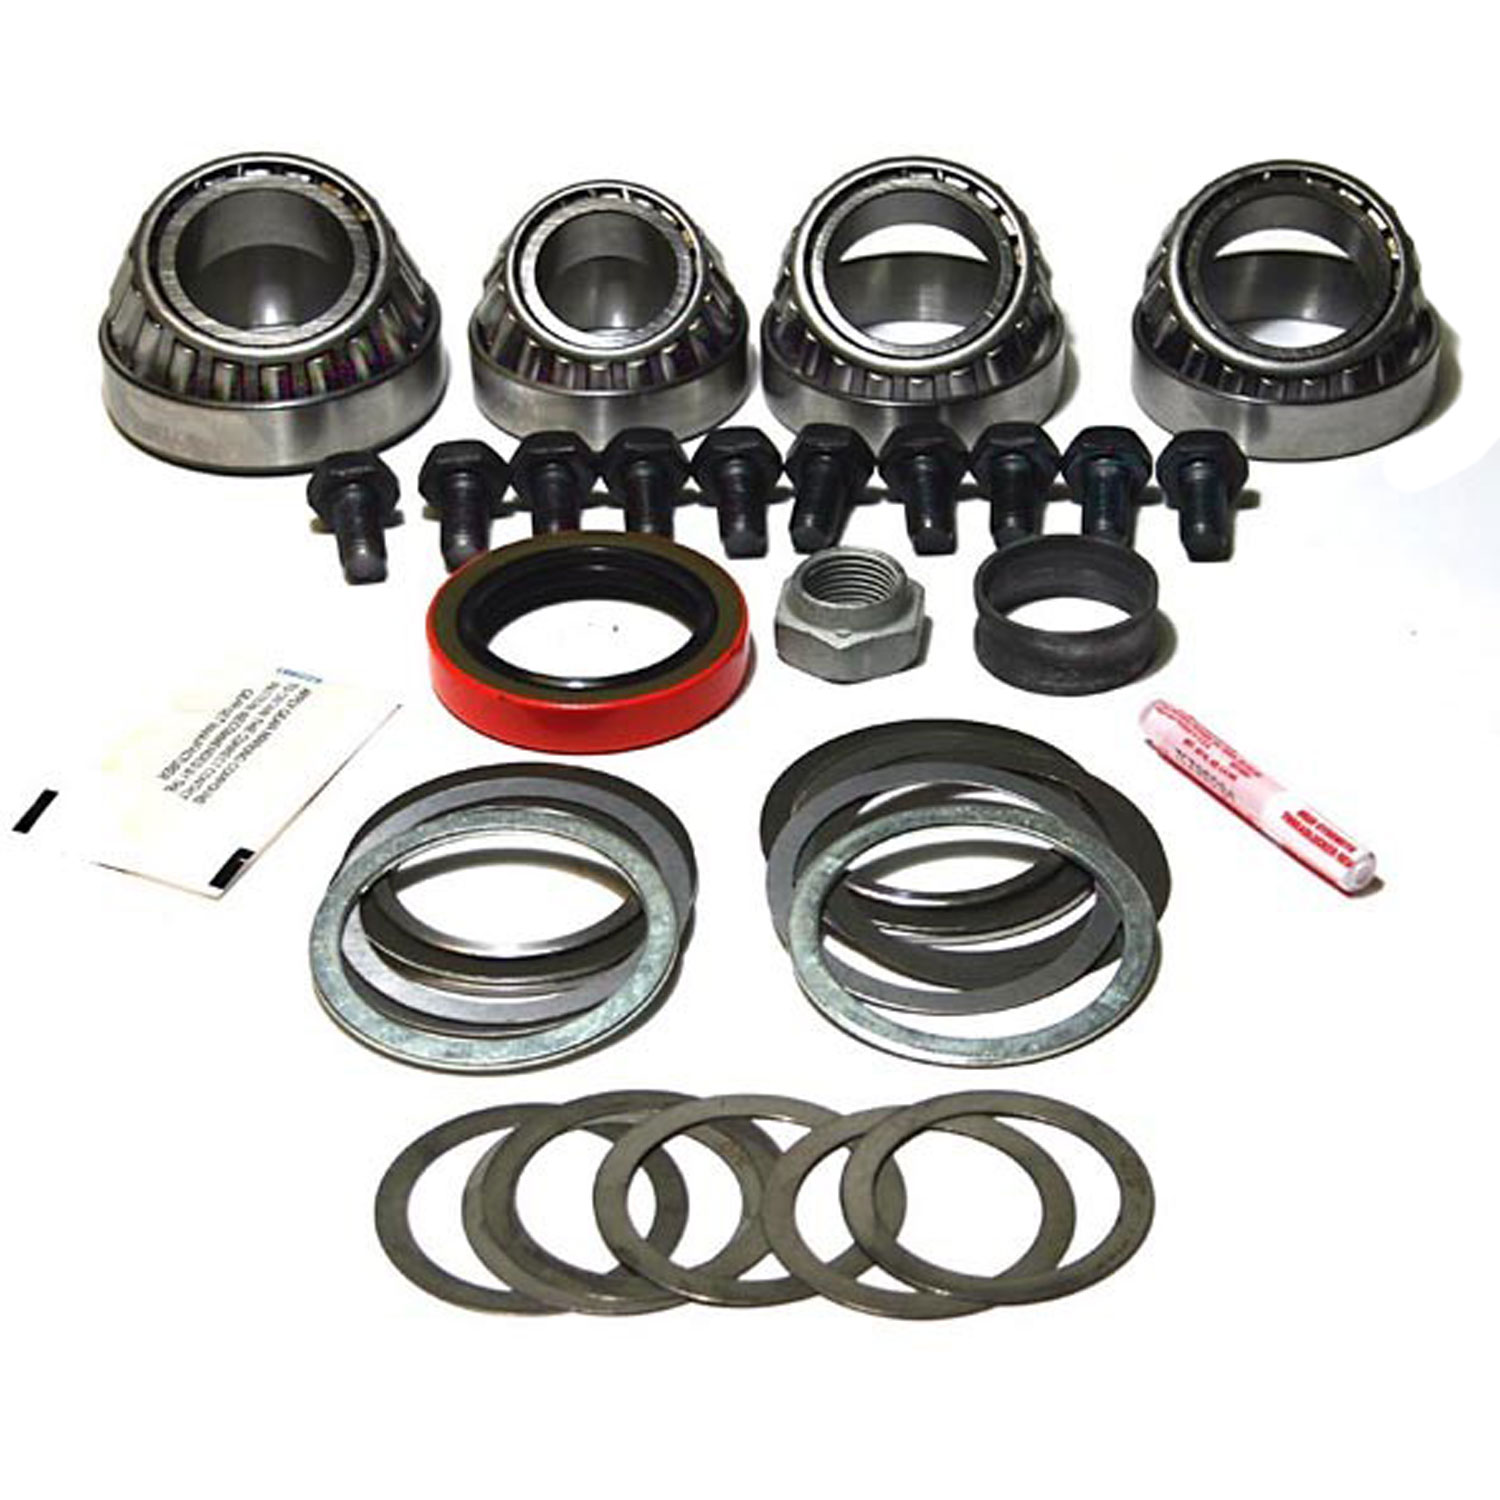 Master Overhaul Kit For Ford 8.8 Axles Includes